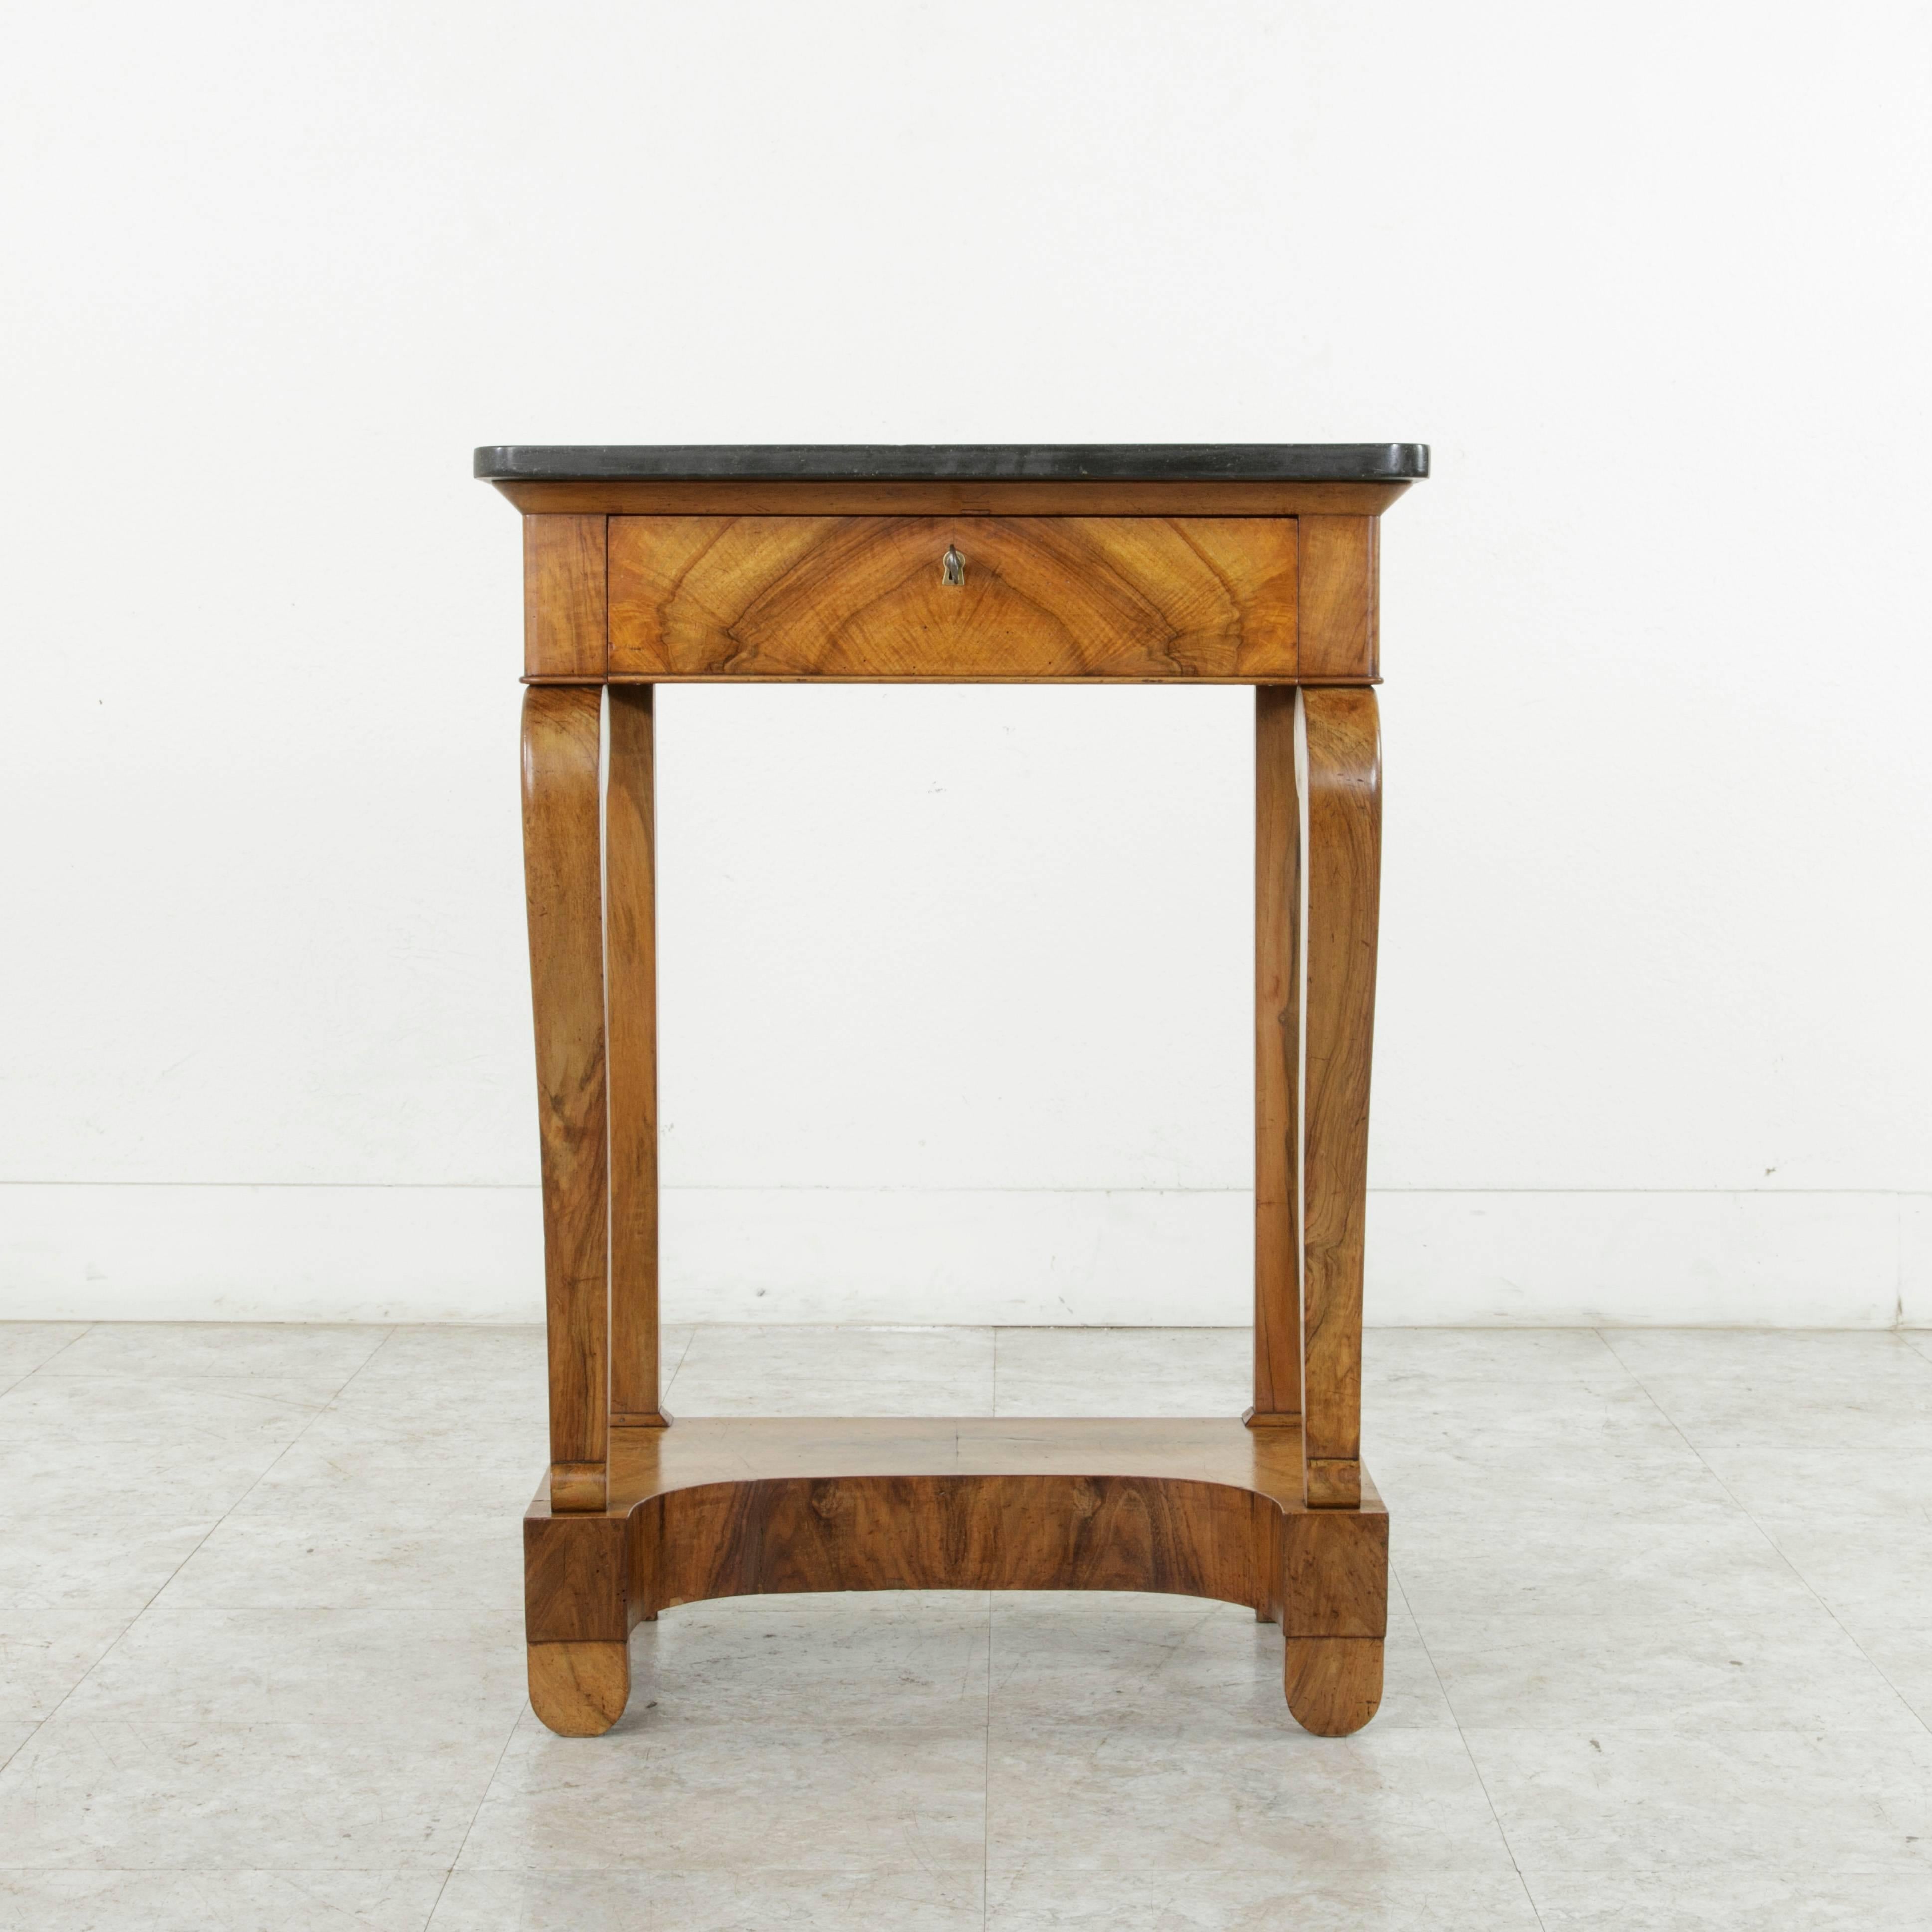 This small-scale early nineteenth century French restauration period console table features stunning bookmatched walnut and is finished with a black marble top. A single drawer of dovetail construction seamlessly forms the front of the upper apron.